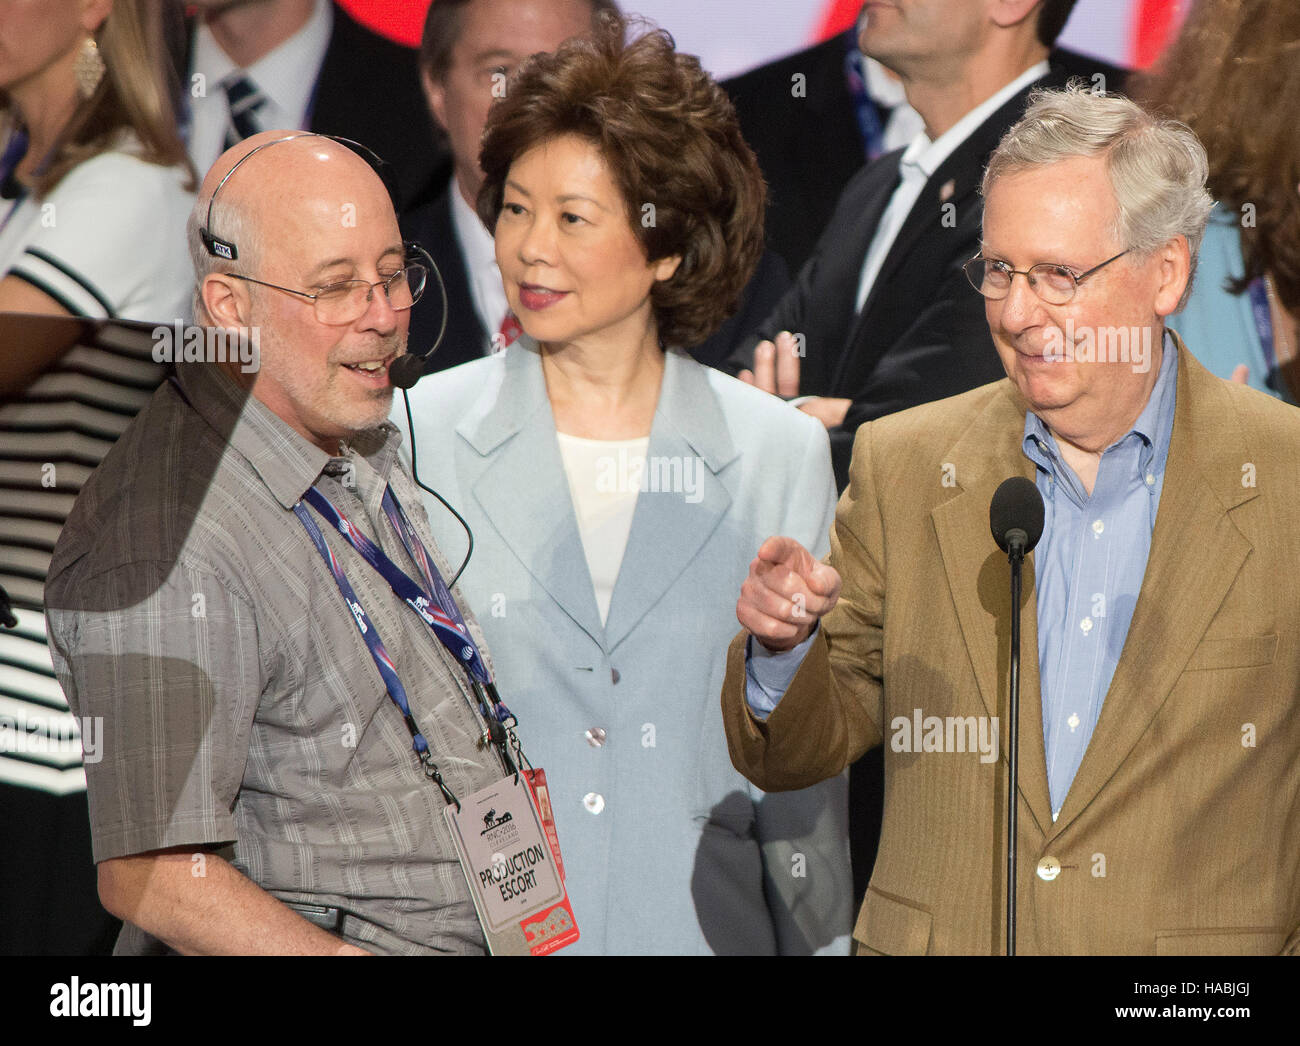 United States Senate Majority Leader Mitch McConnell (Republican of Kentucky) and his wife, Elaine Chao participate in a rehearsal prior to the 2016 Republican National Convention in Cleveland, Ohio on Sunday, July 17, 2016. Credit: Ron Sachs/CNP (RESTRICTION: NO New York or New Jersey Newspapers or newspapers within a 75 mile radius of New York City) /MediaPunch /MediaPunch Stock Photo